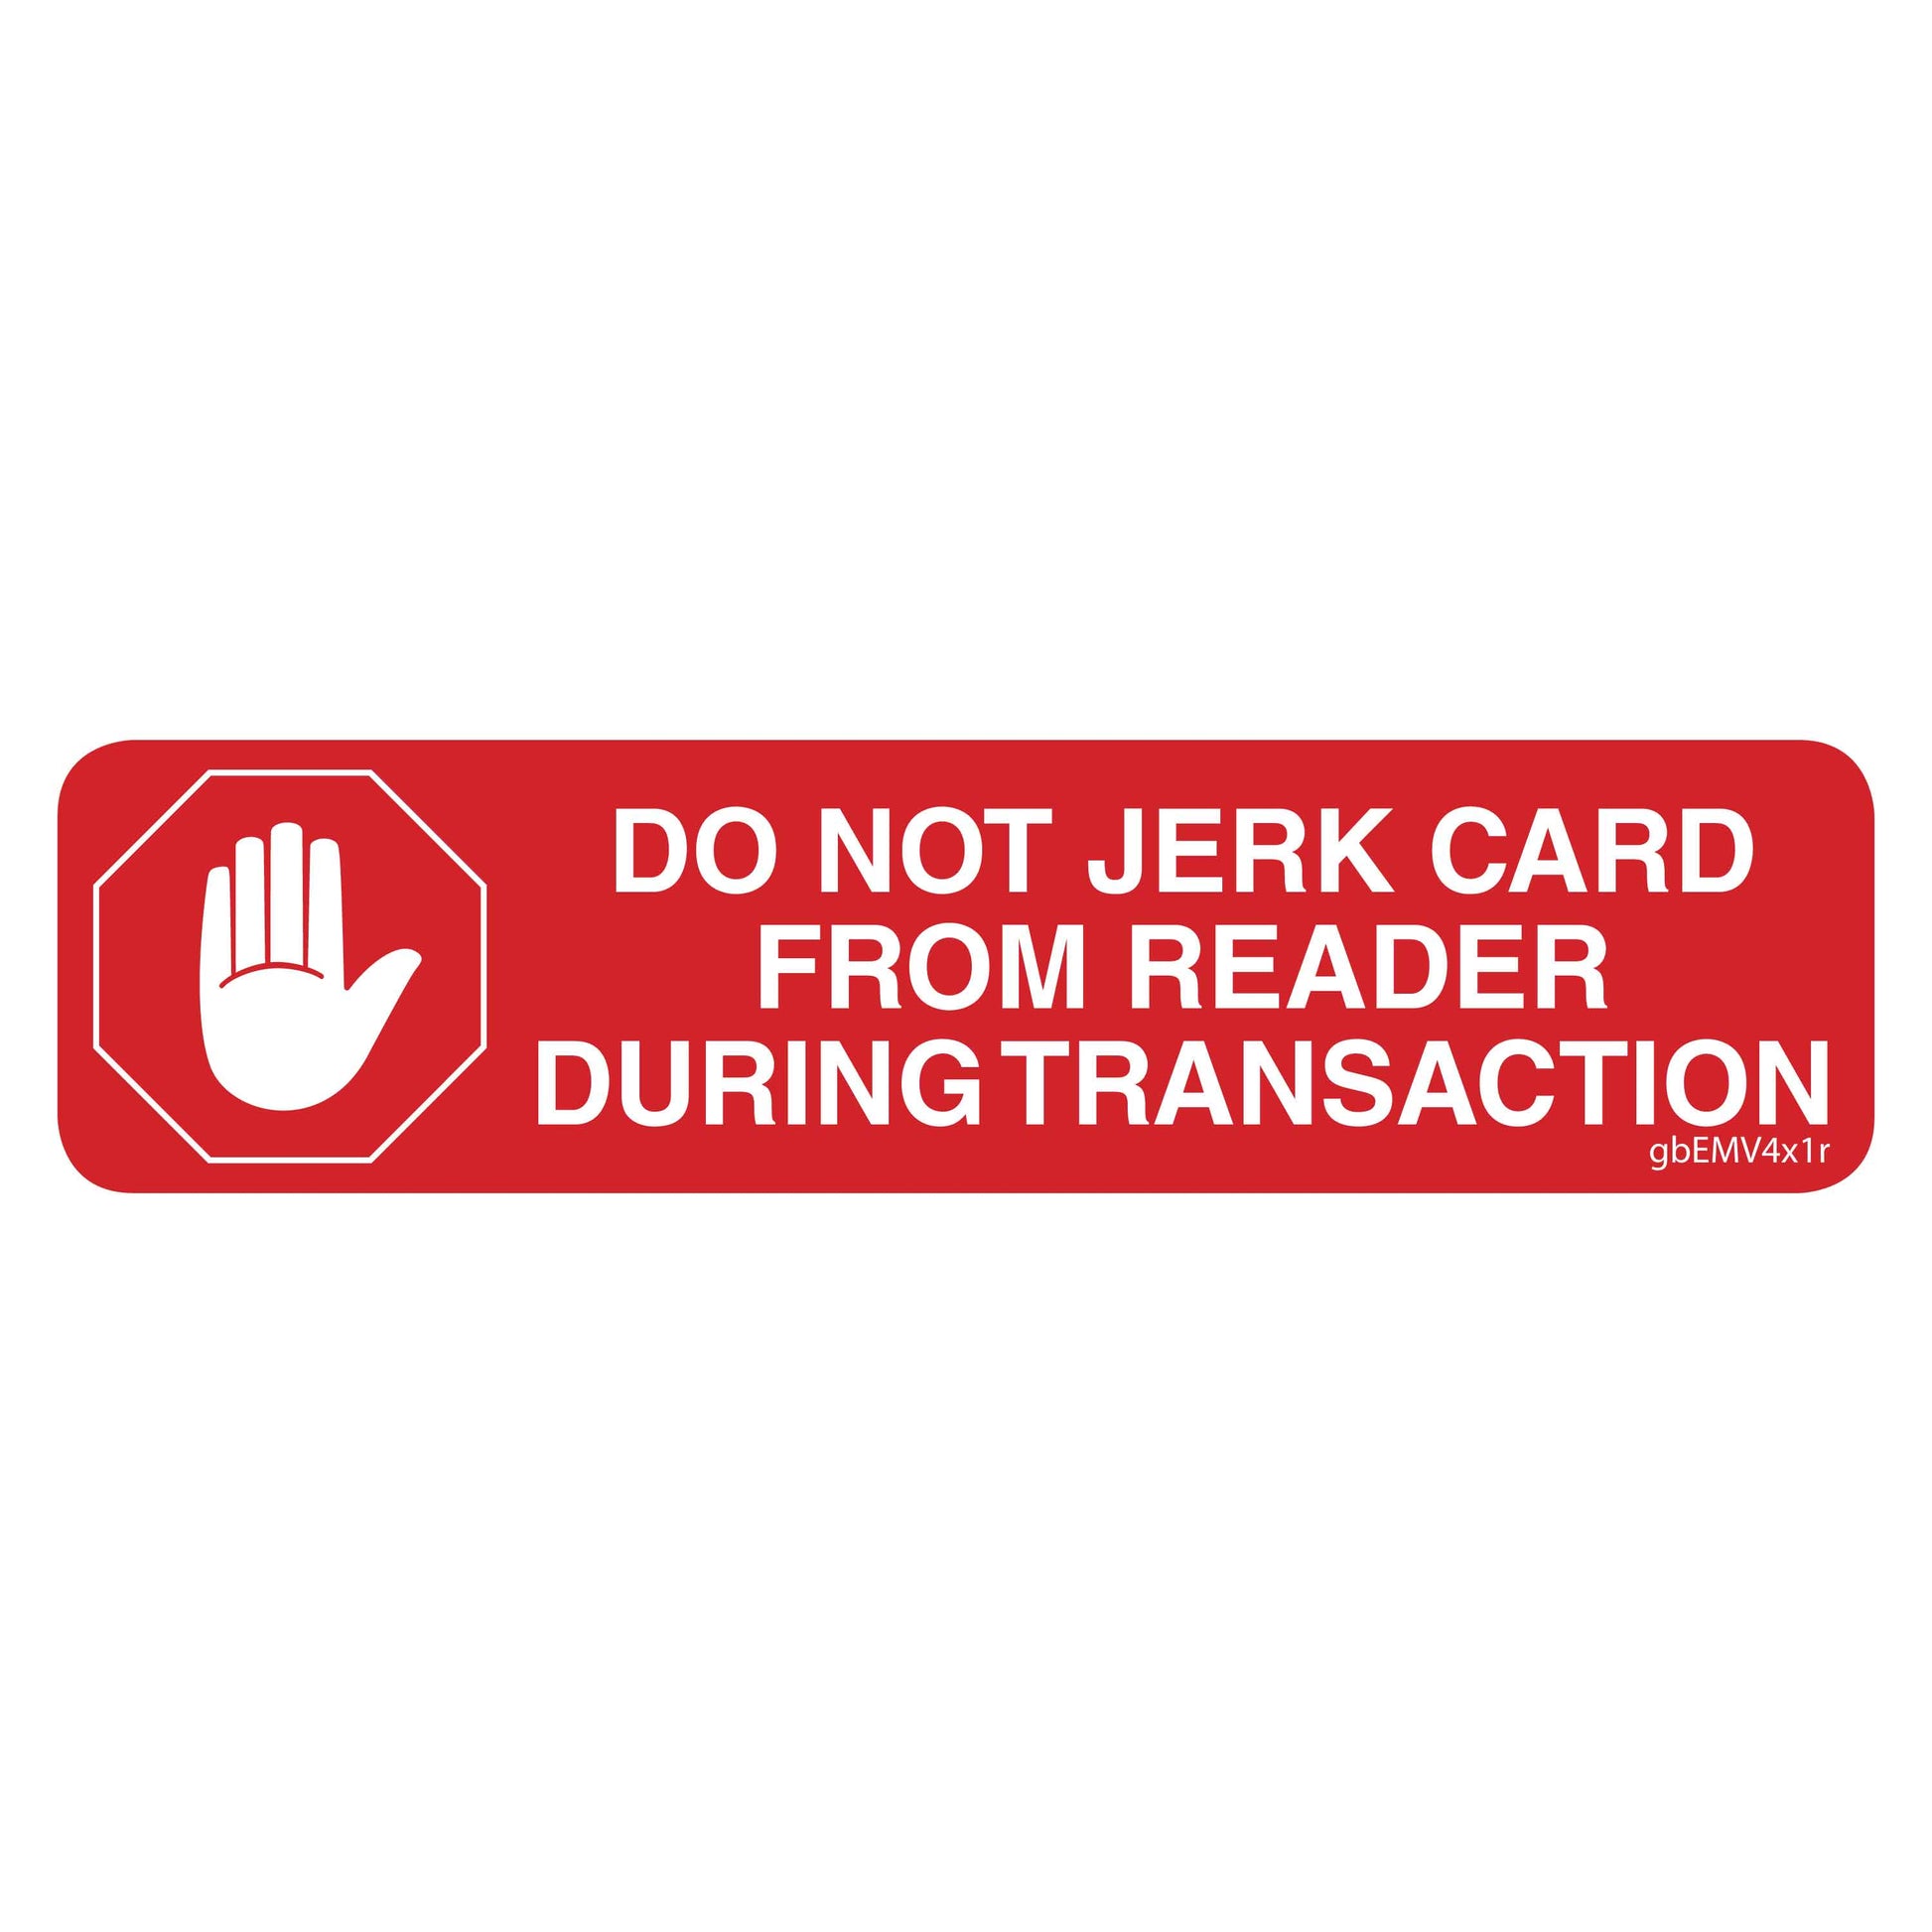 Stop Do Not Jerk Card Decal. 4 inches by 1 inch in size.